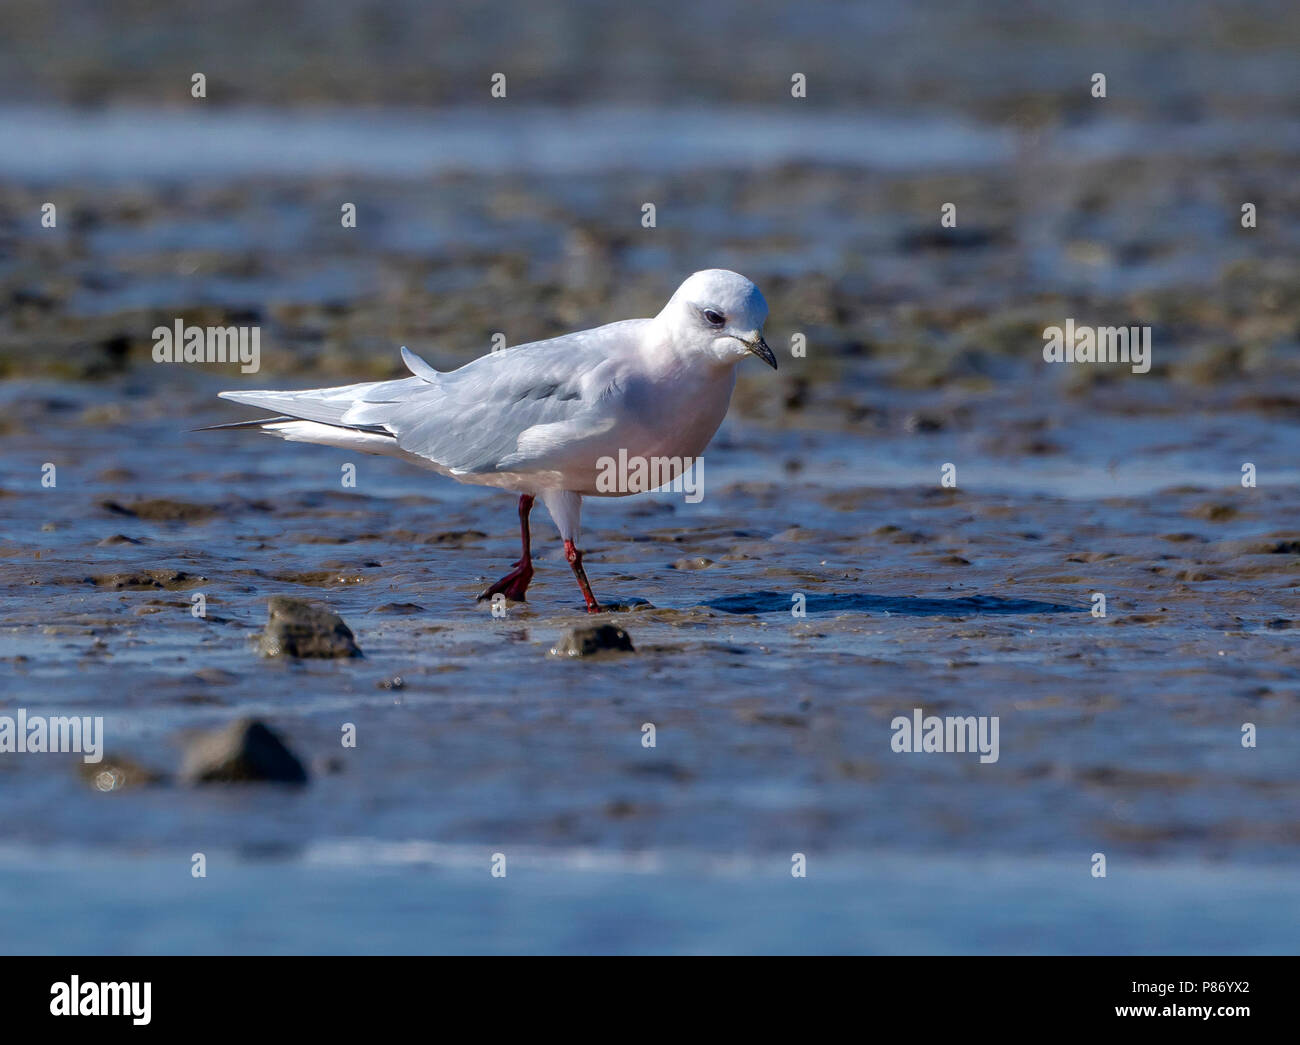 Adult Ross's Gull sitting on mud in Numansdorp, Zuid-Holland, Nederland. April 2011. Stock Photo